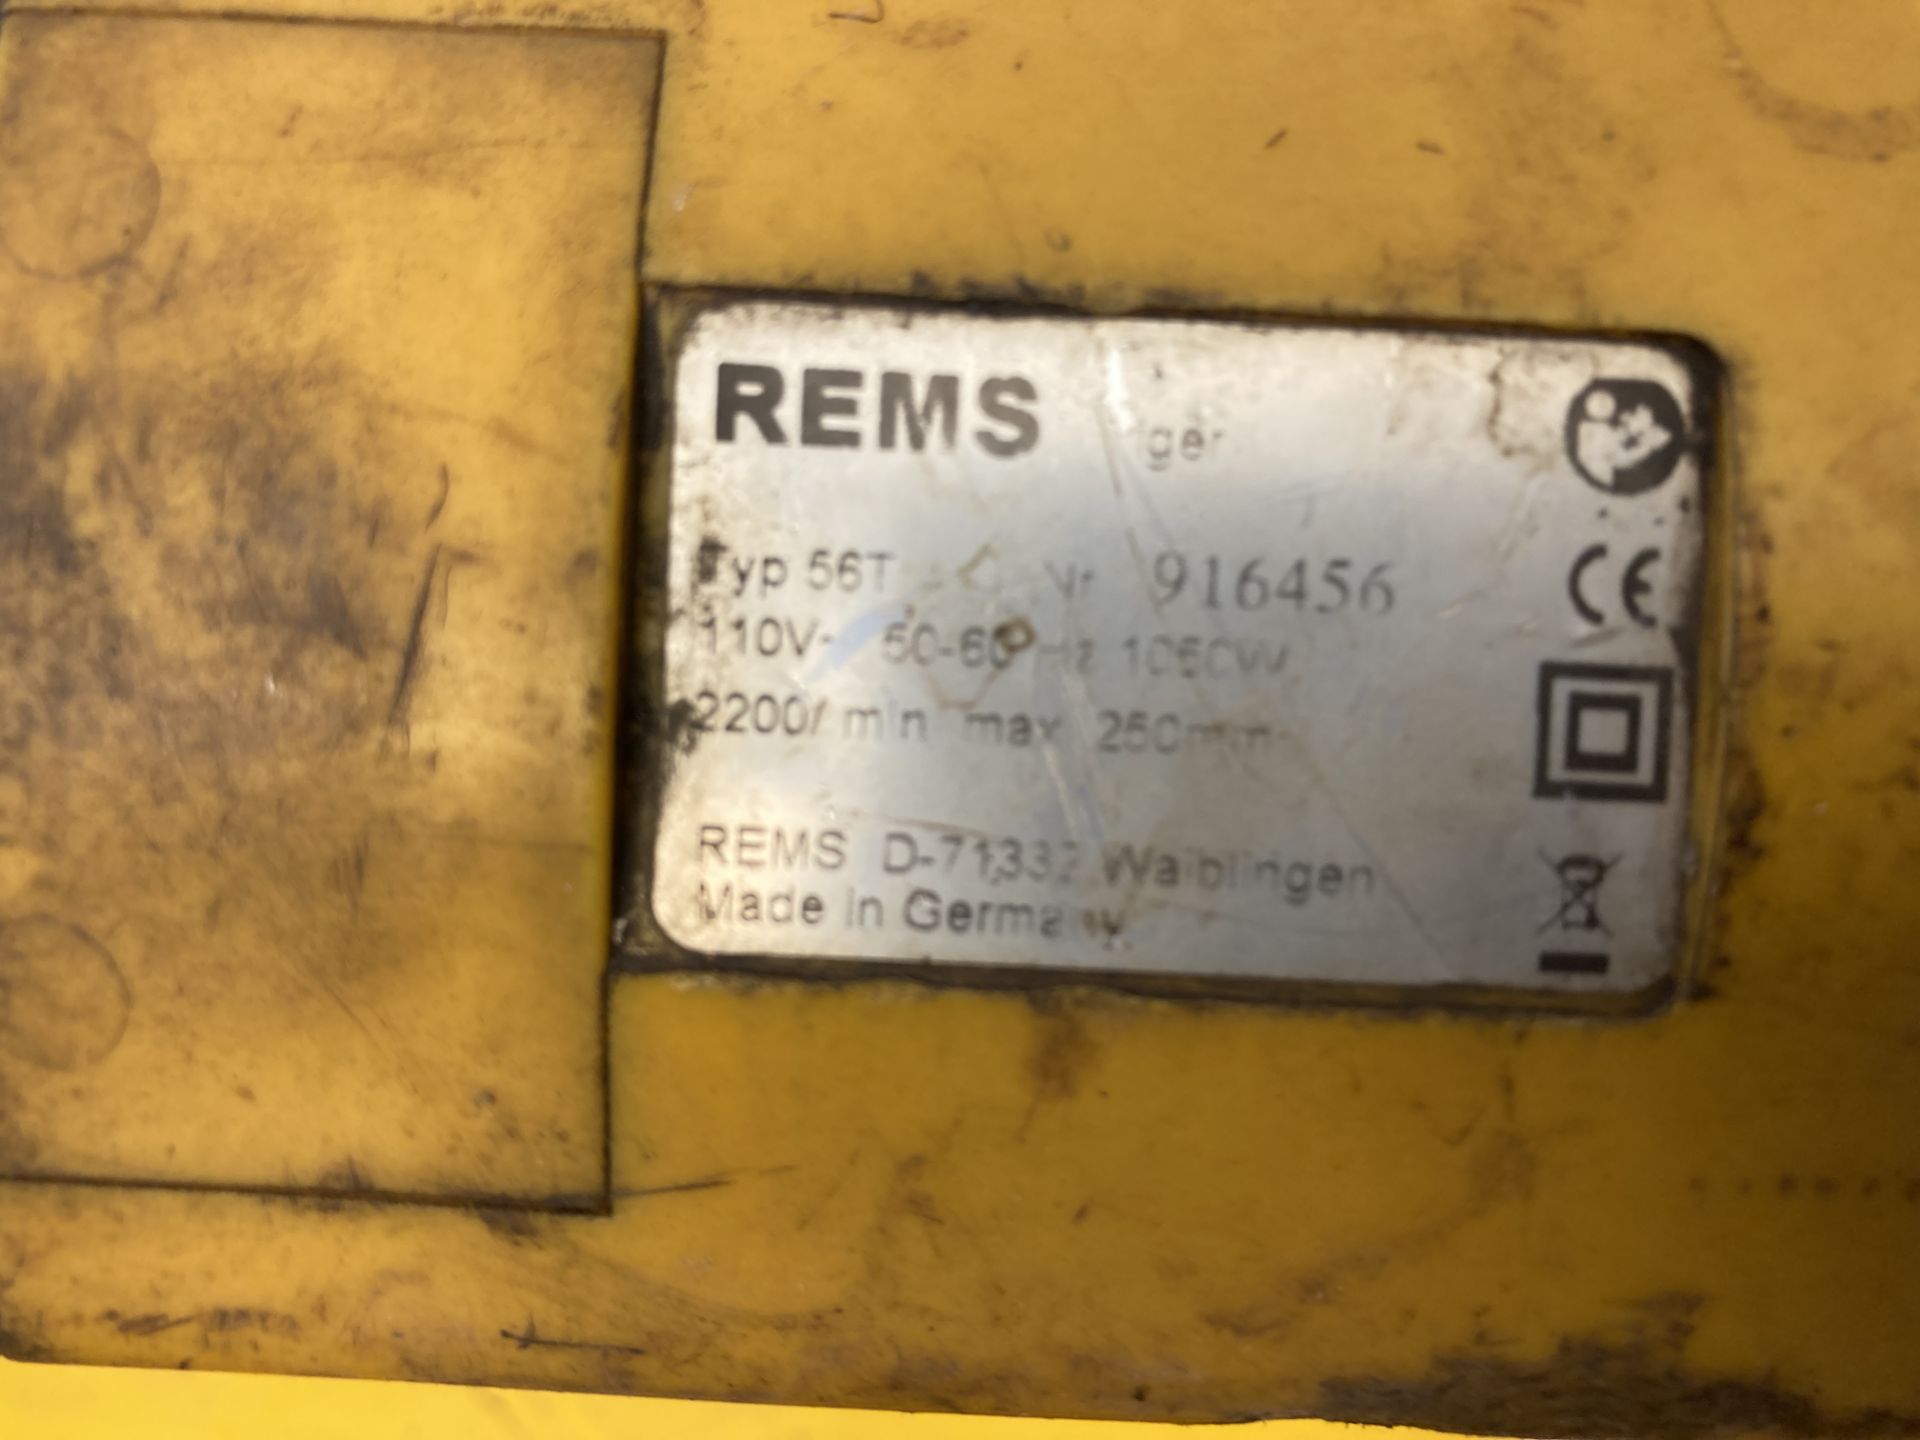 REMS Tiger 916456 Type 56T Reciprocating Saw W/ Various Blades - Image 4 of 5